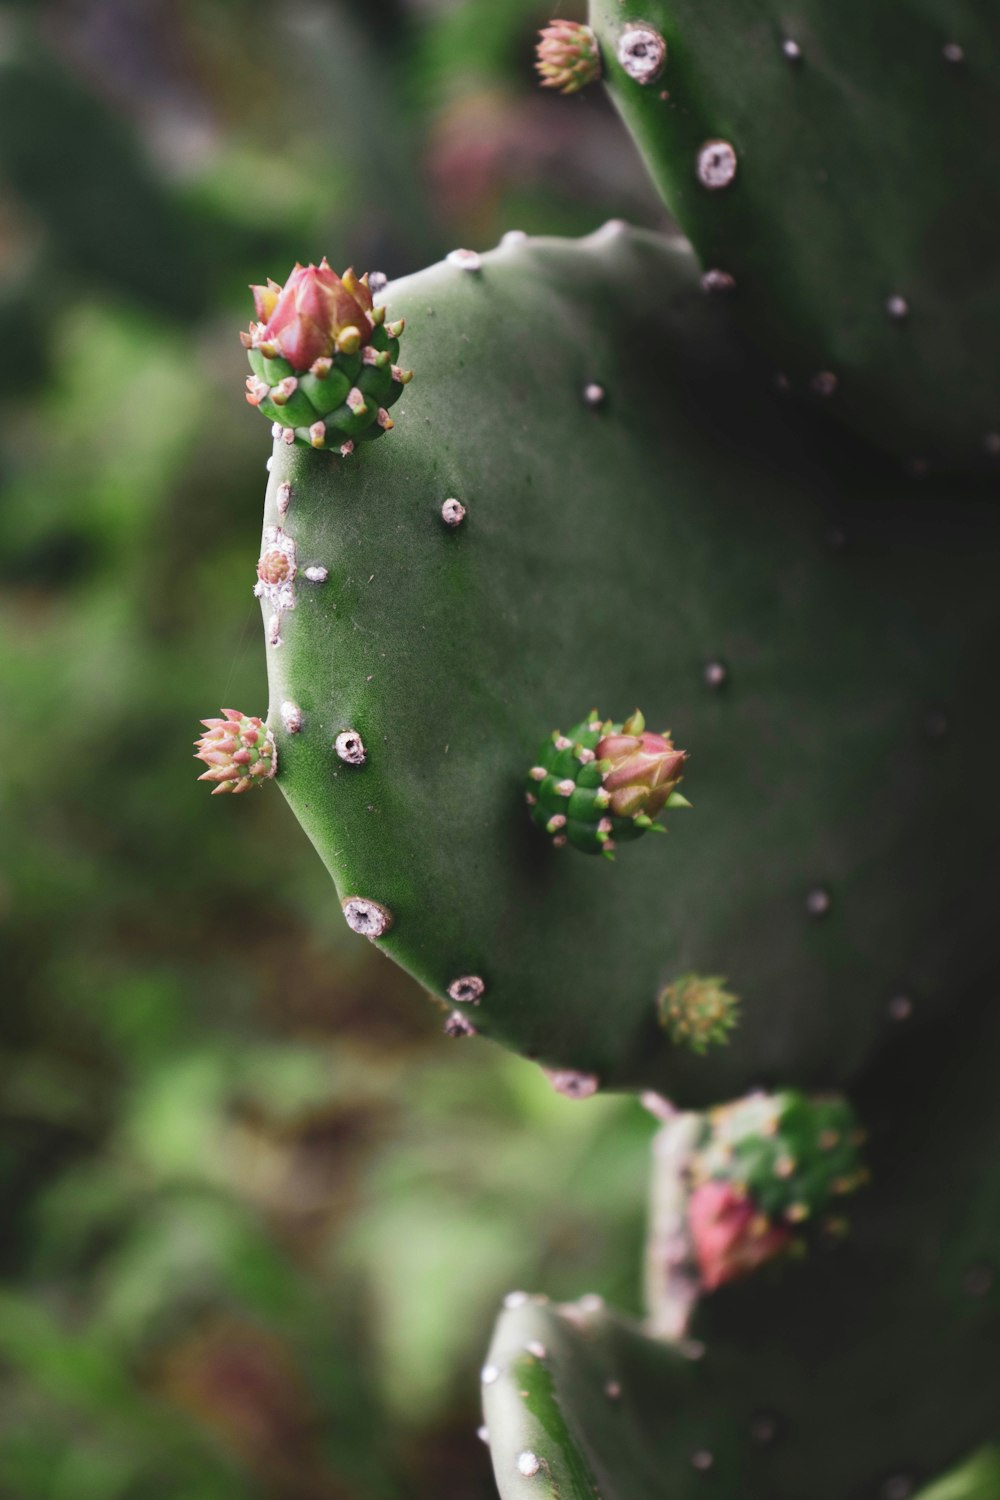 green cactus with water droplets